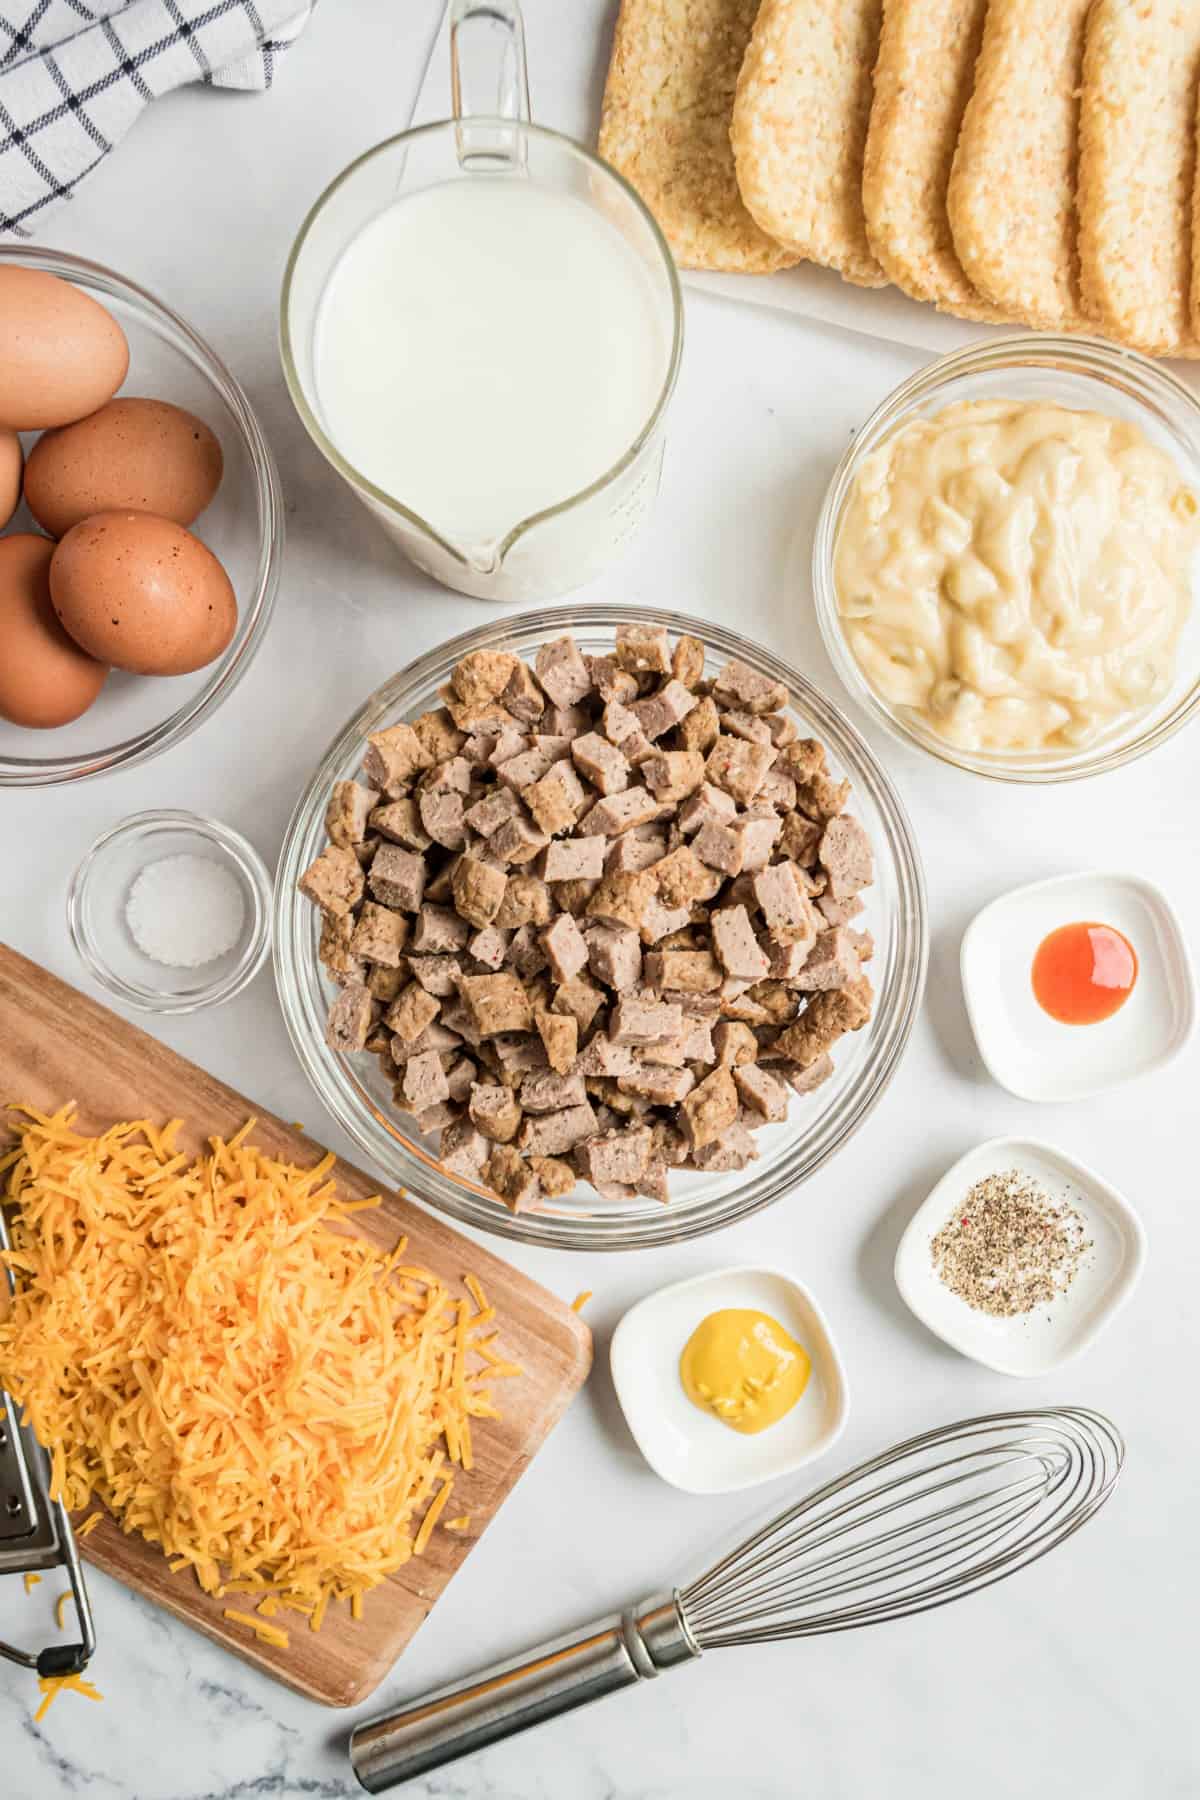 Ingredients needed for egg casserole, including sausage, cheese, eggs, milk, and seasoning.